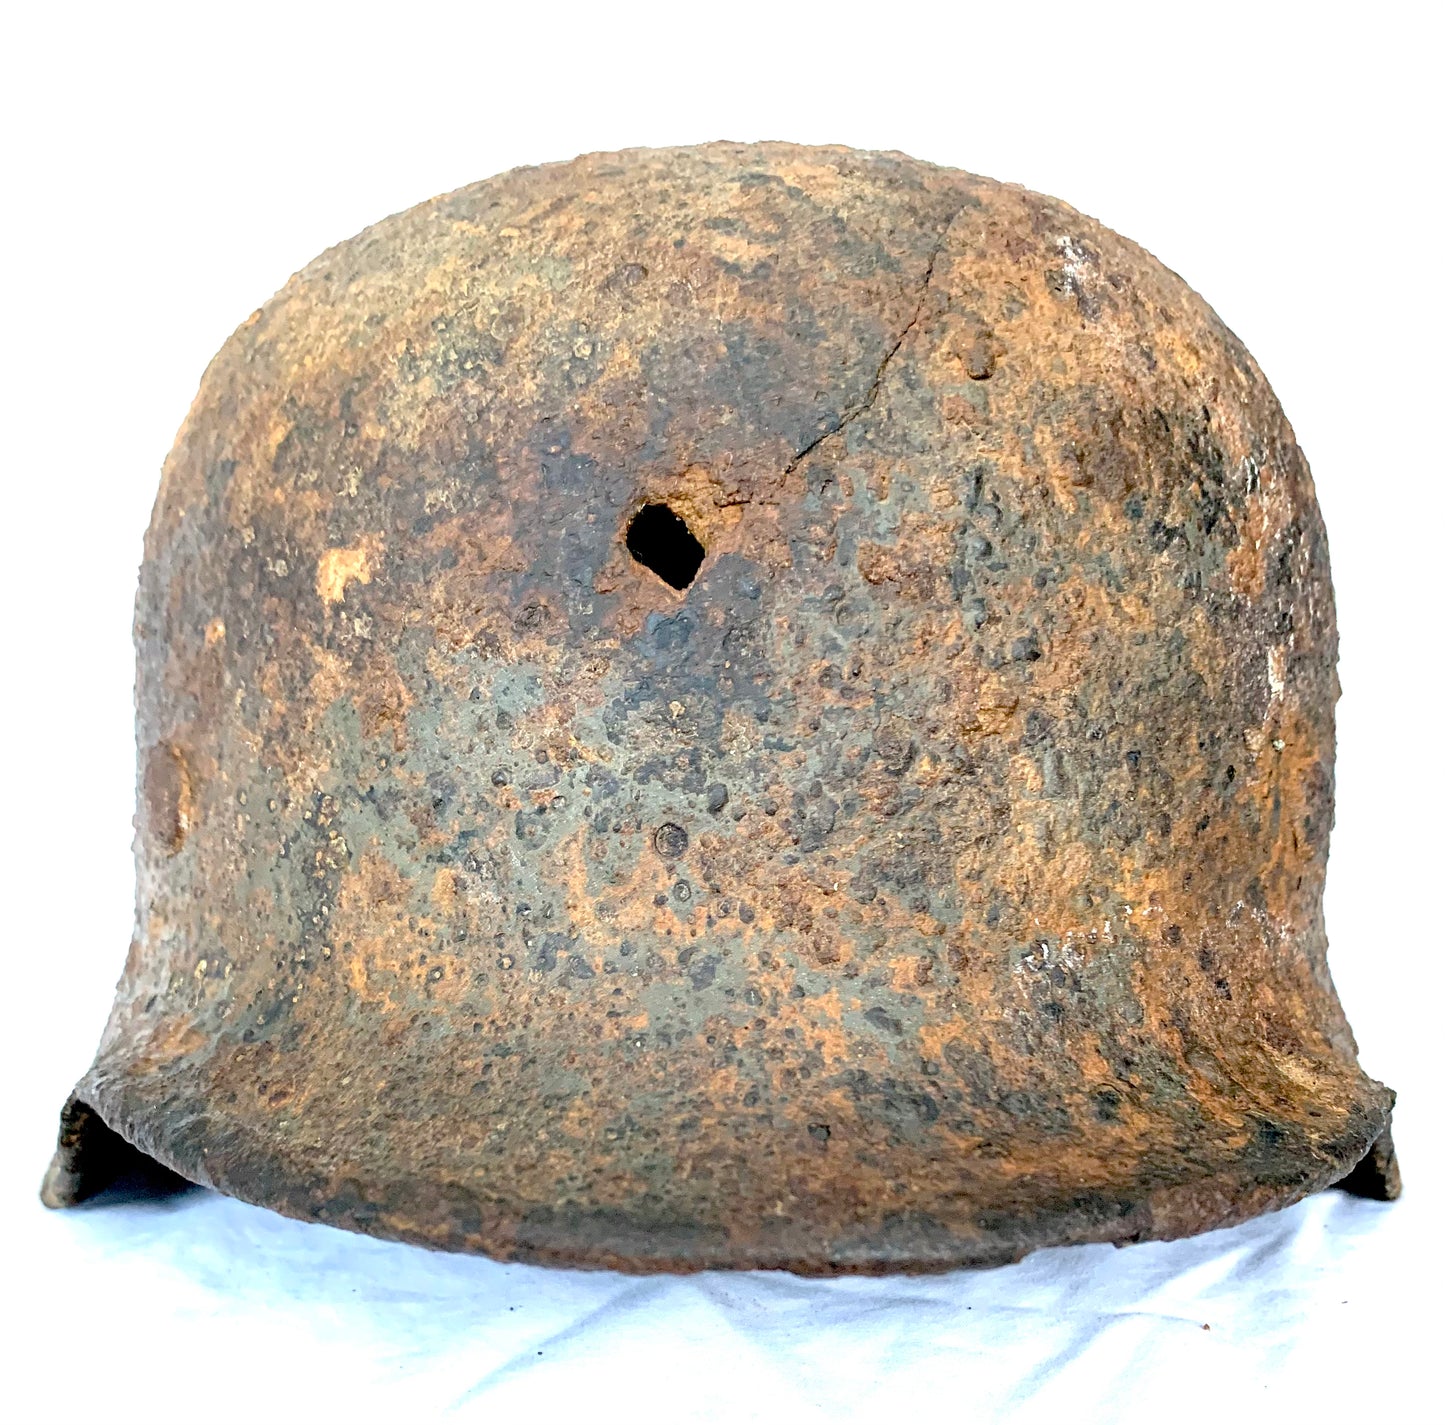 WW2 German M40 Battle Damaged Helmet recovered from the Eastern Front.